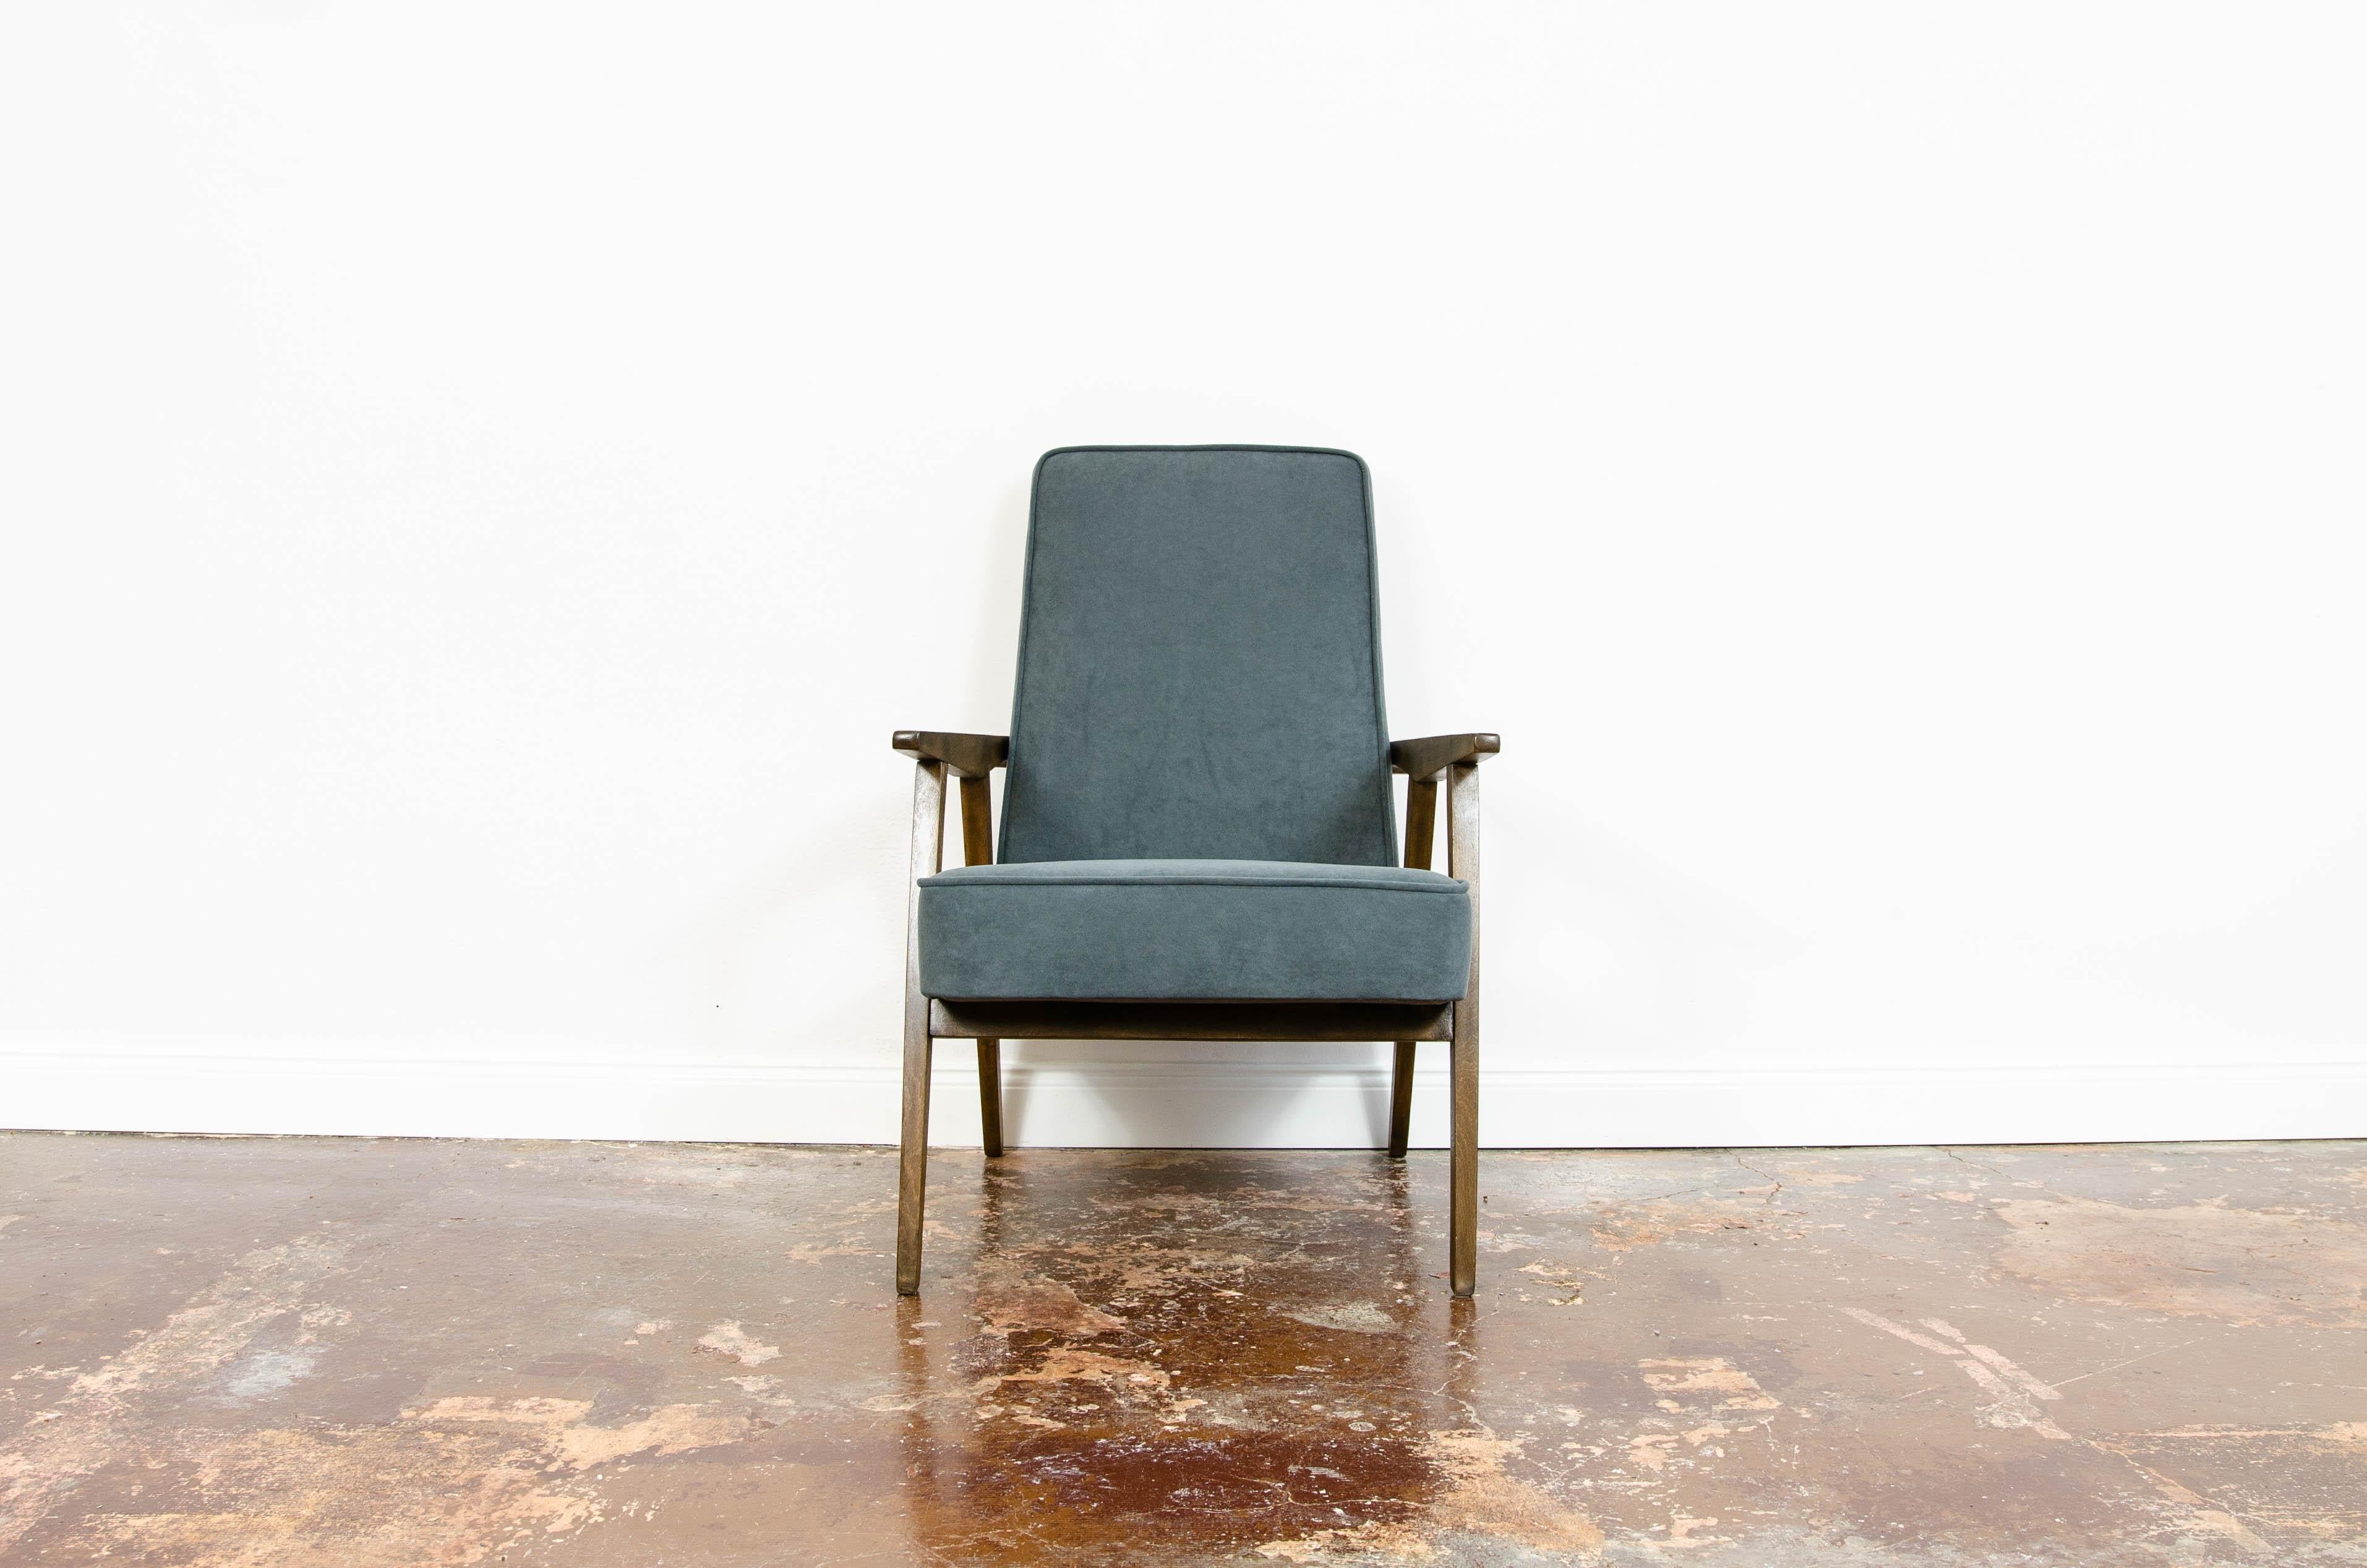 Restored vintage mid-century grey velvet armchair, 1960s Poland.

Mid-century armchair manufactured in Poland. 
Solid beech frame have been completely restored.
Reupholstered in soft grey velvet.